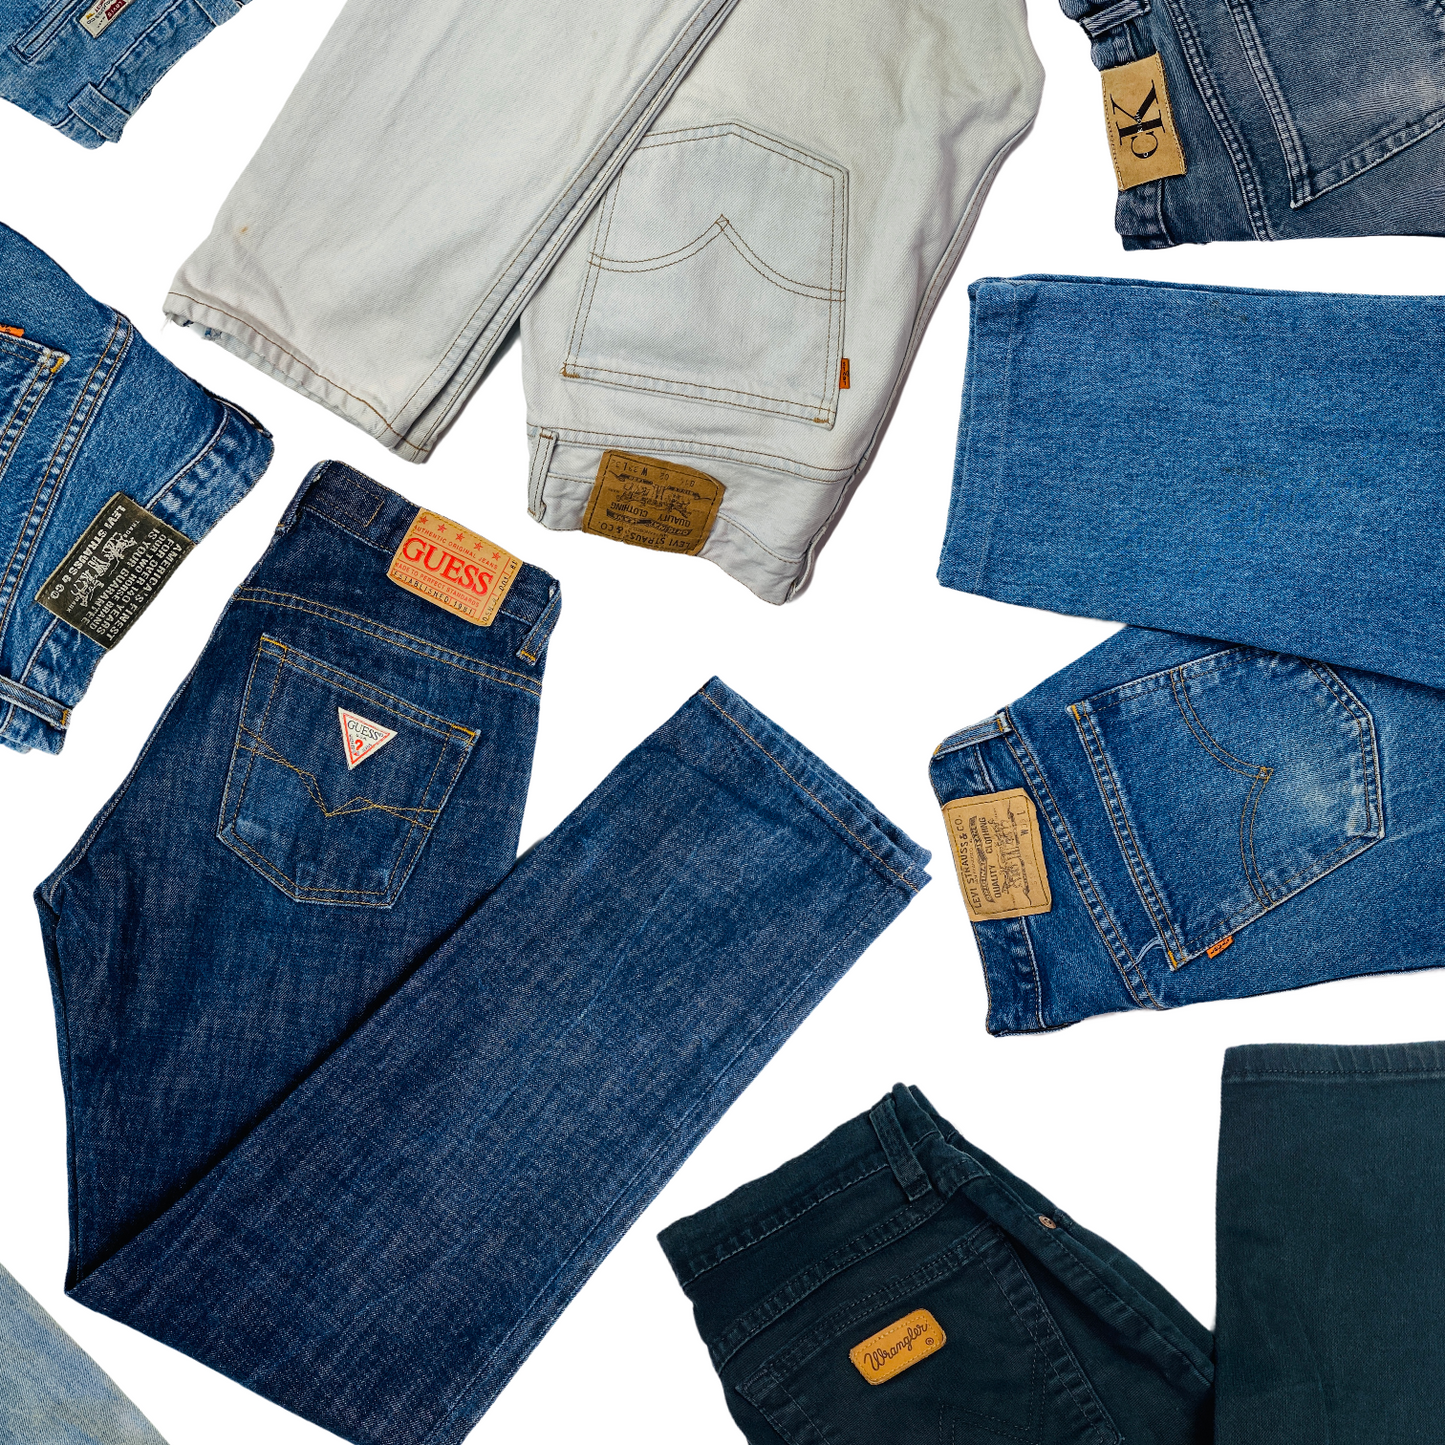 Jeans wholesaler in Mumbai sell amazing product in market which is the best  quality. You can contact our stores directly also for purchase clothes....  | By DVG Jeans wholesaler | Facebook